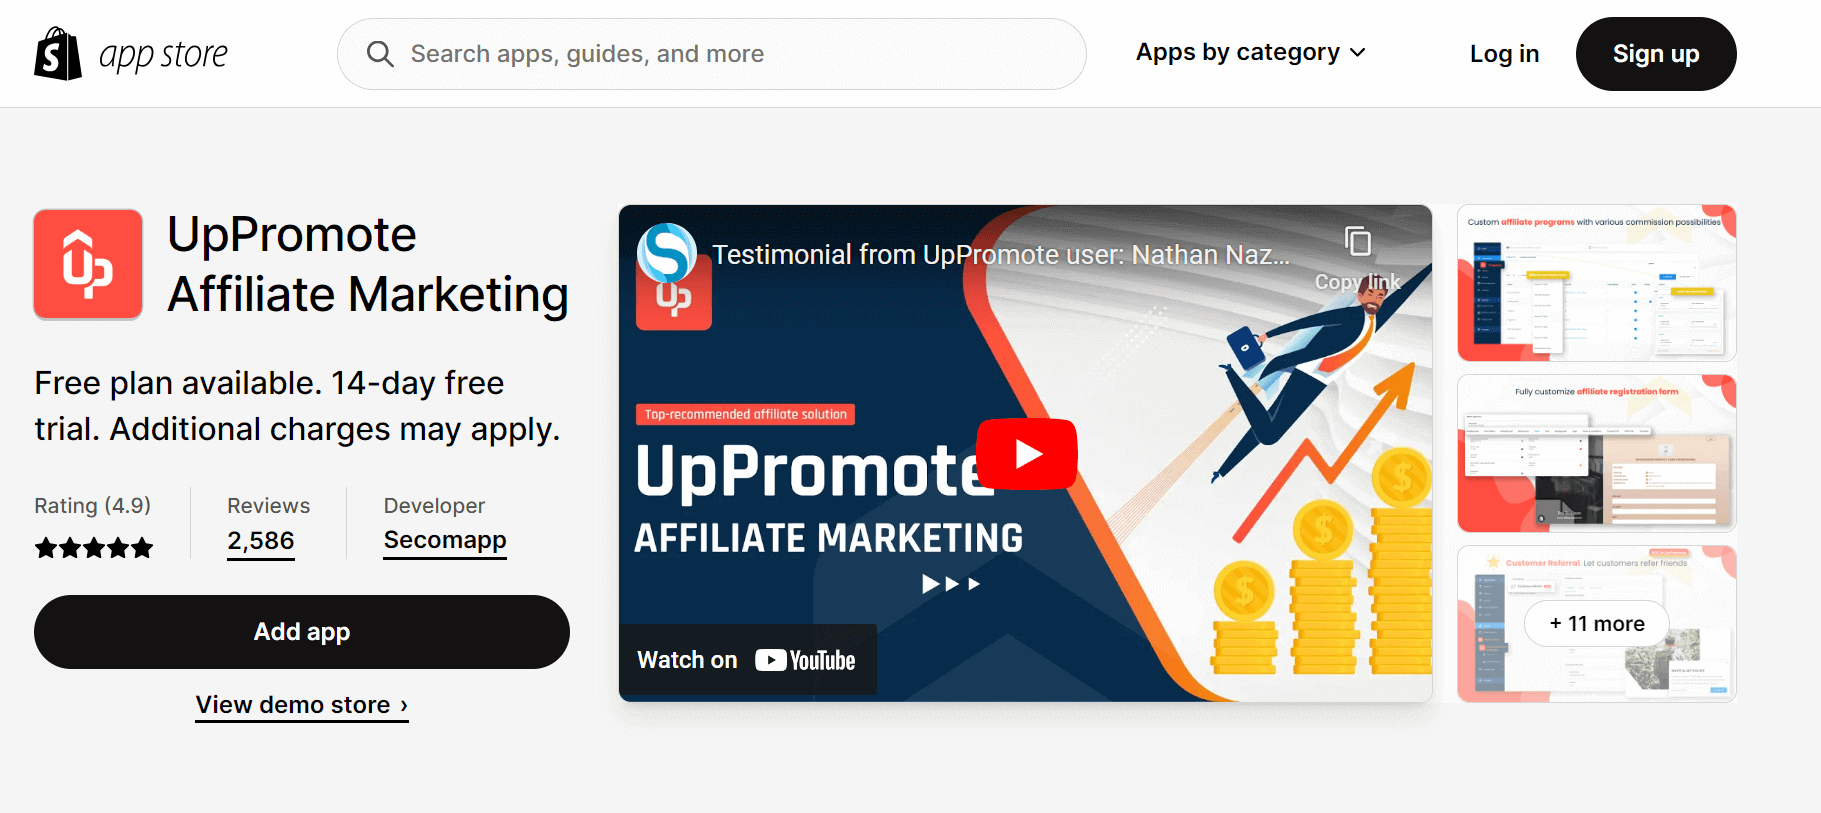 Shopify Affiliate App - UpPromote